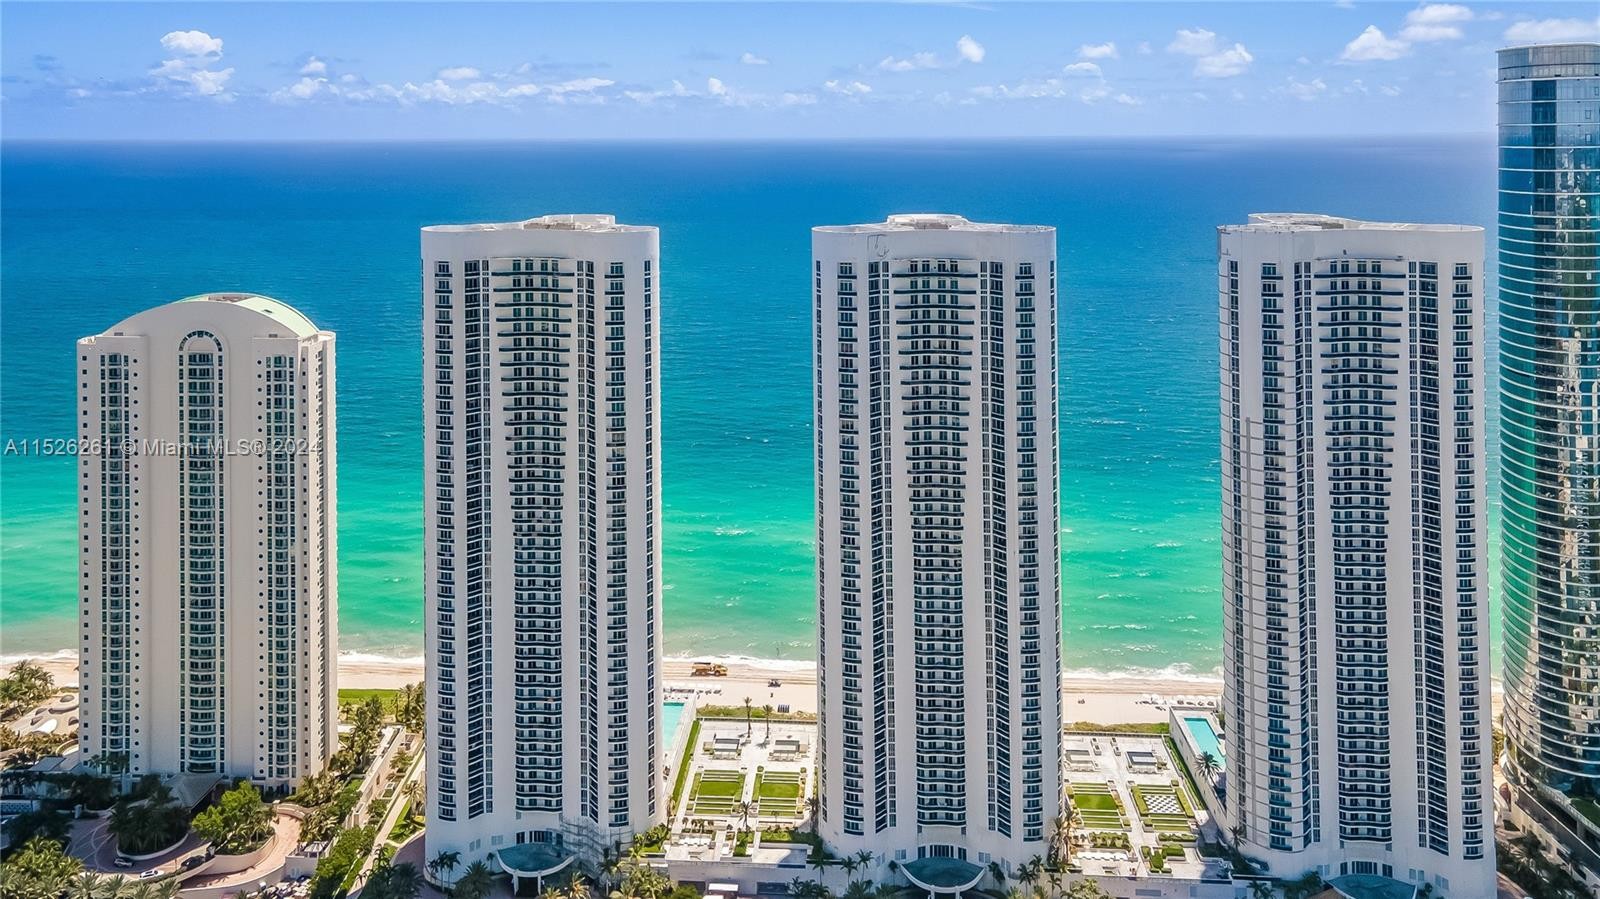 11. 15901 Collins Ave (Avail 5/1-11/15)